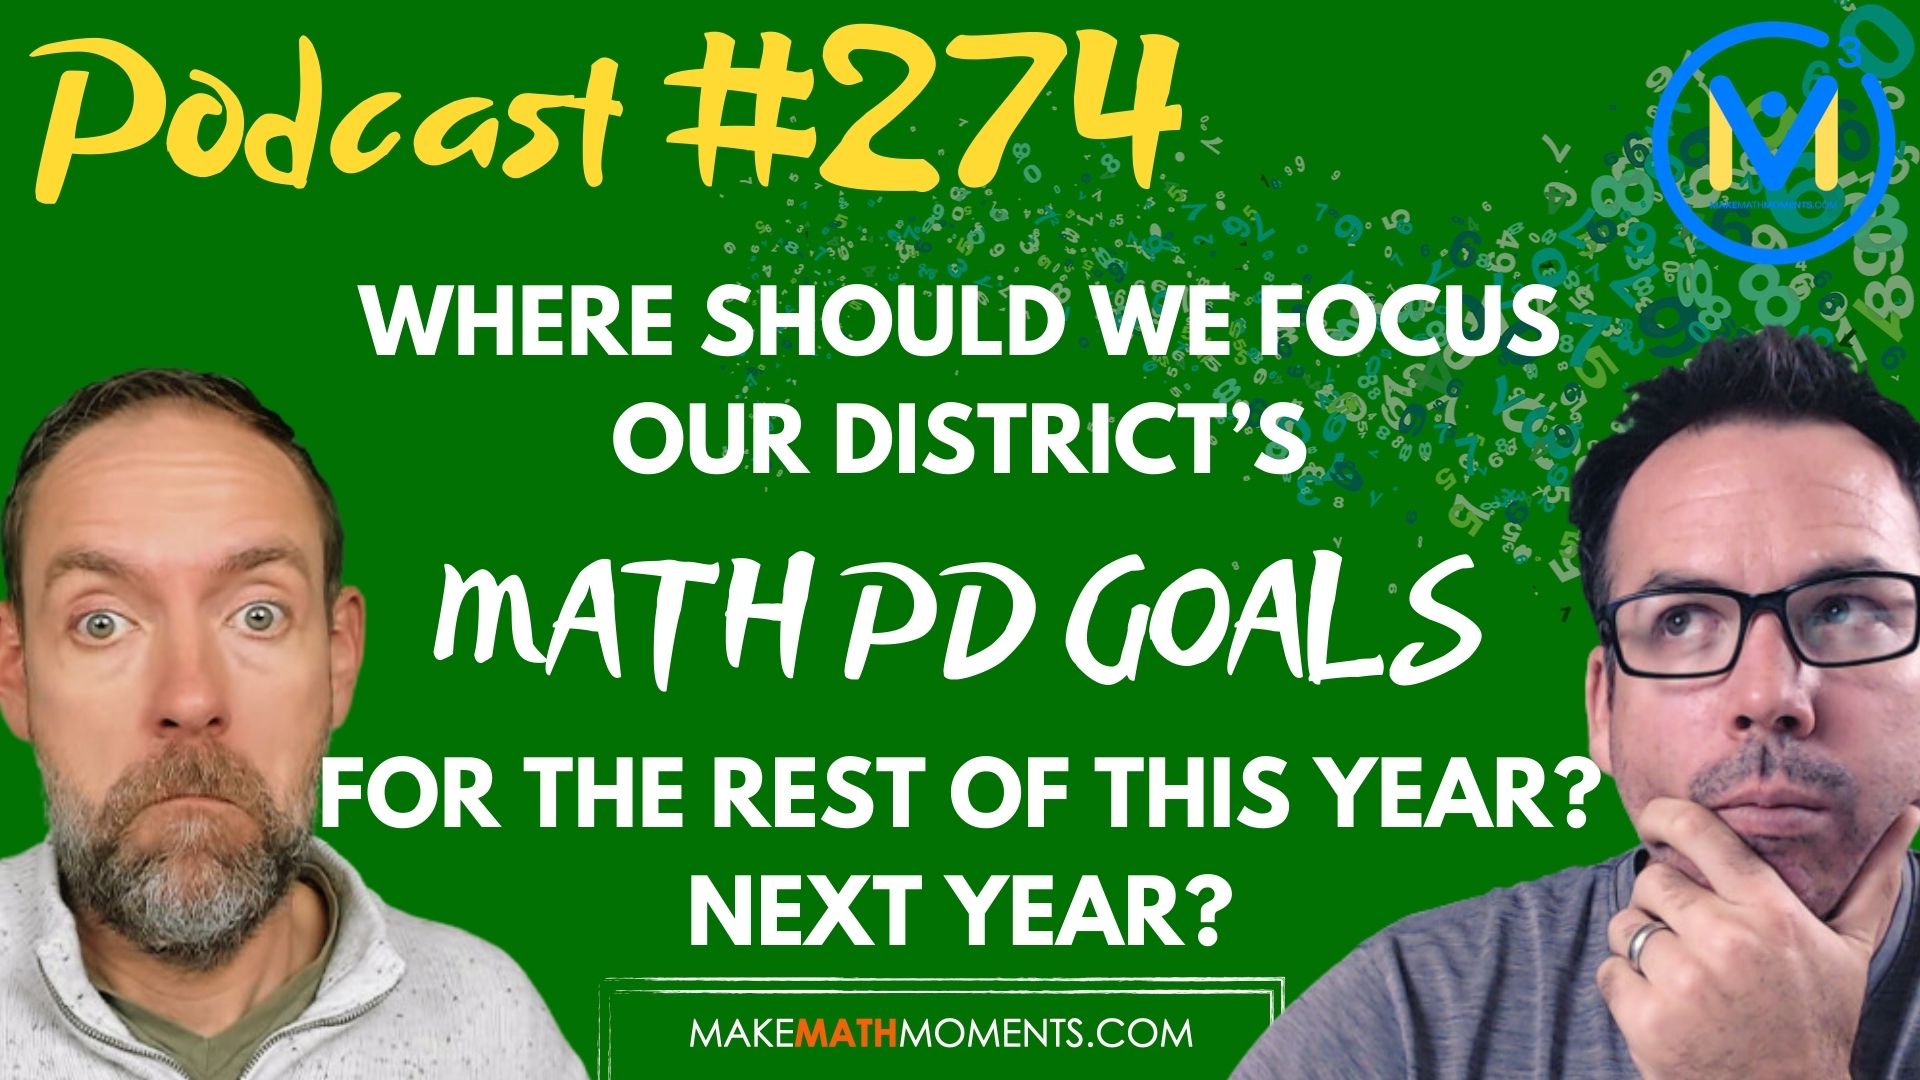 Episode #274: Where should we focus our district’s math PD goals for the rest of this year? Next year?